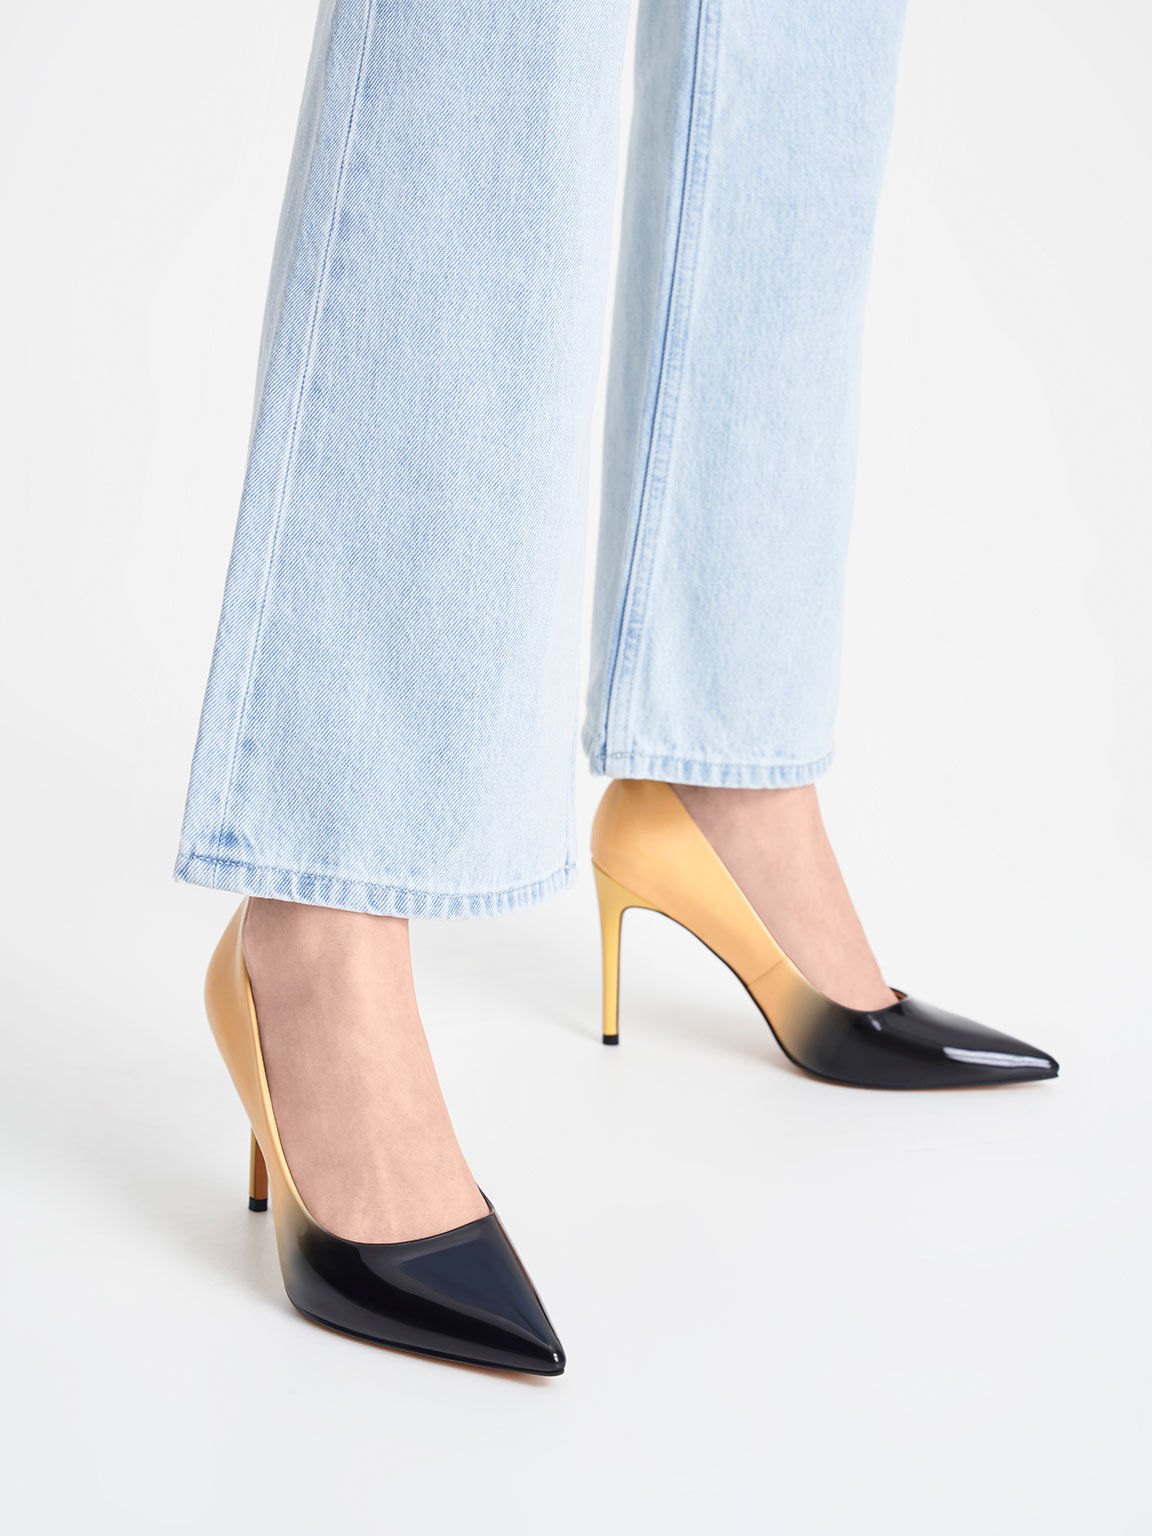 Chanel Two Tone Pumps | hhfi.in